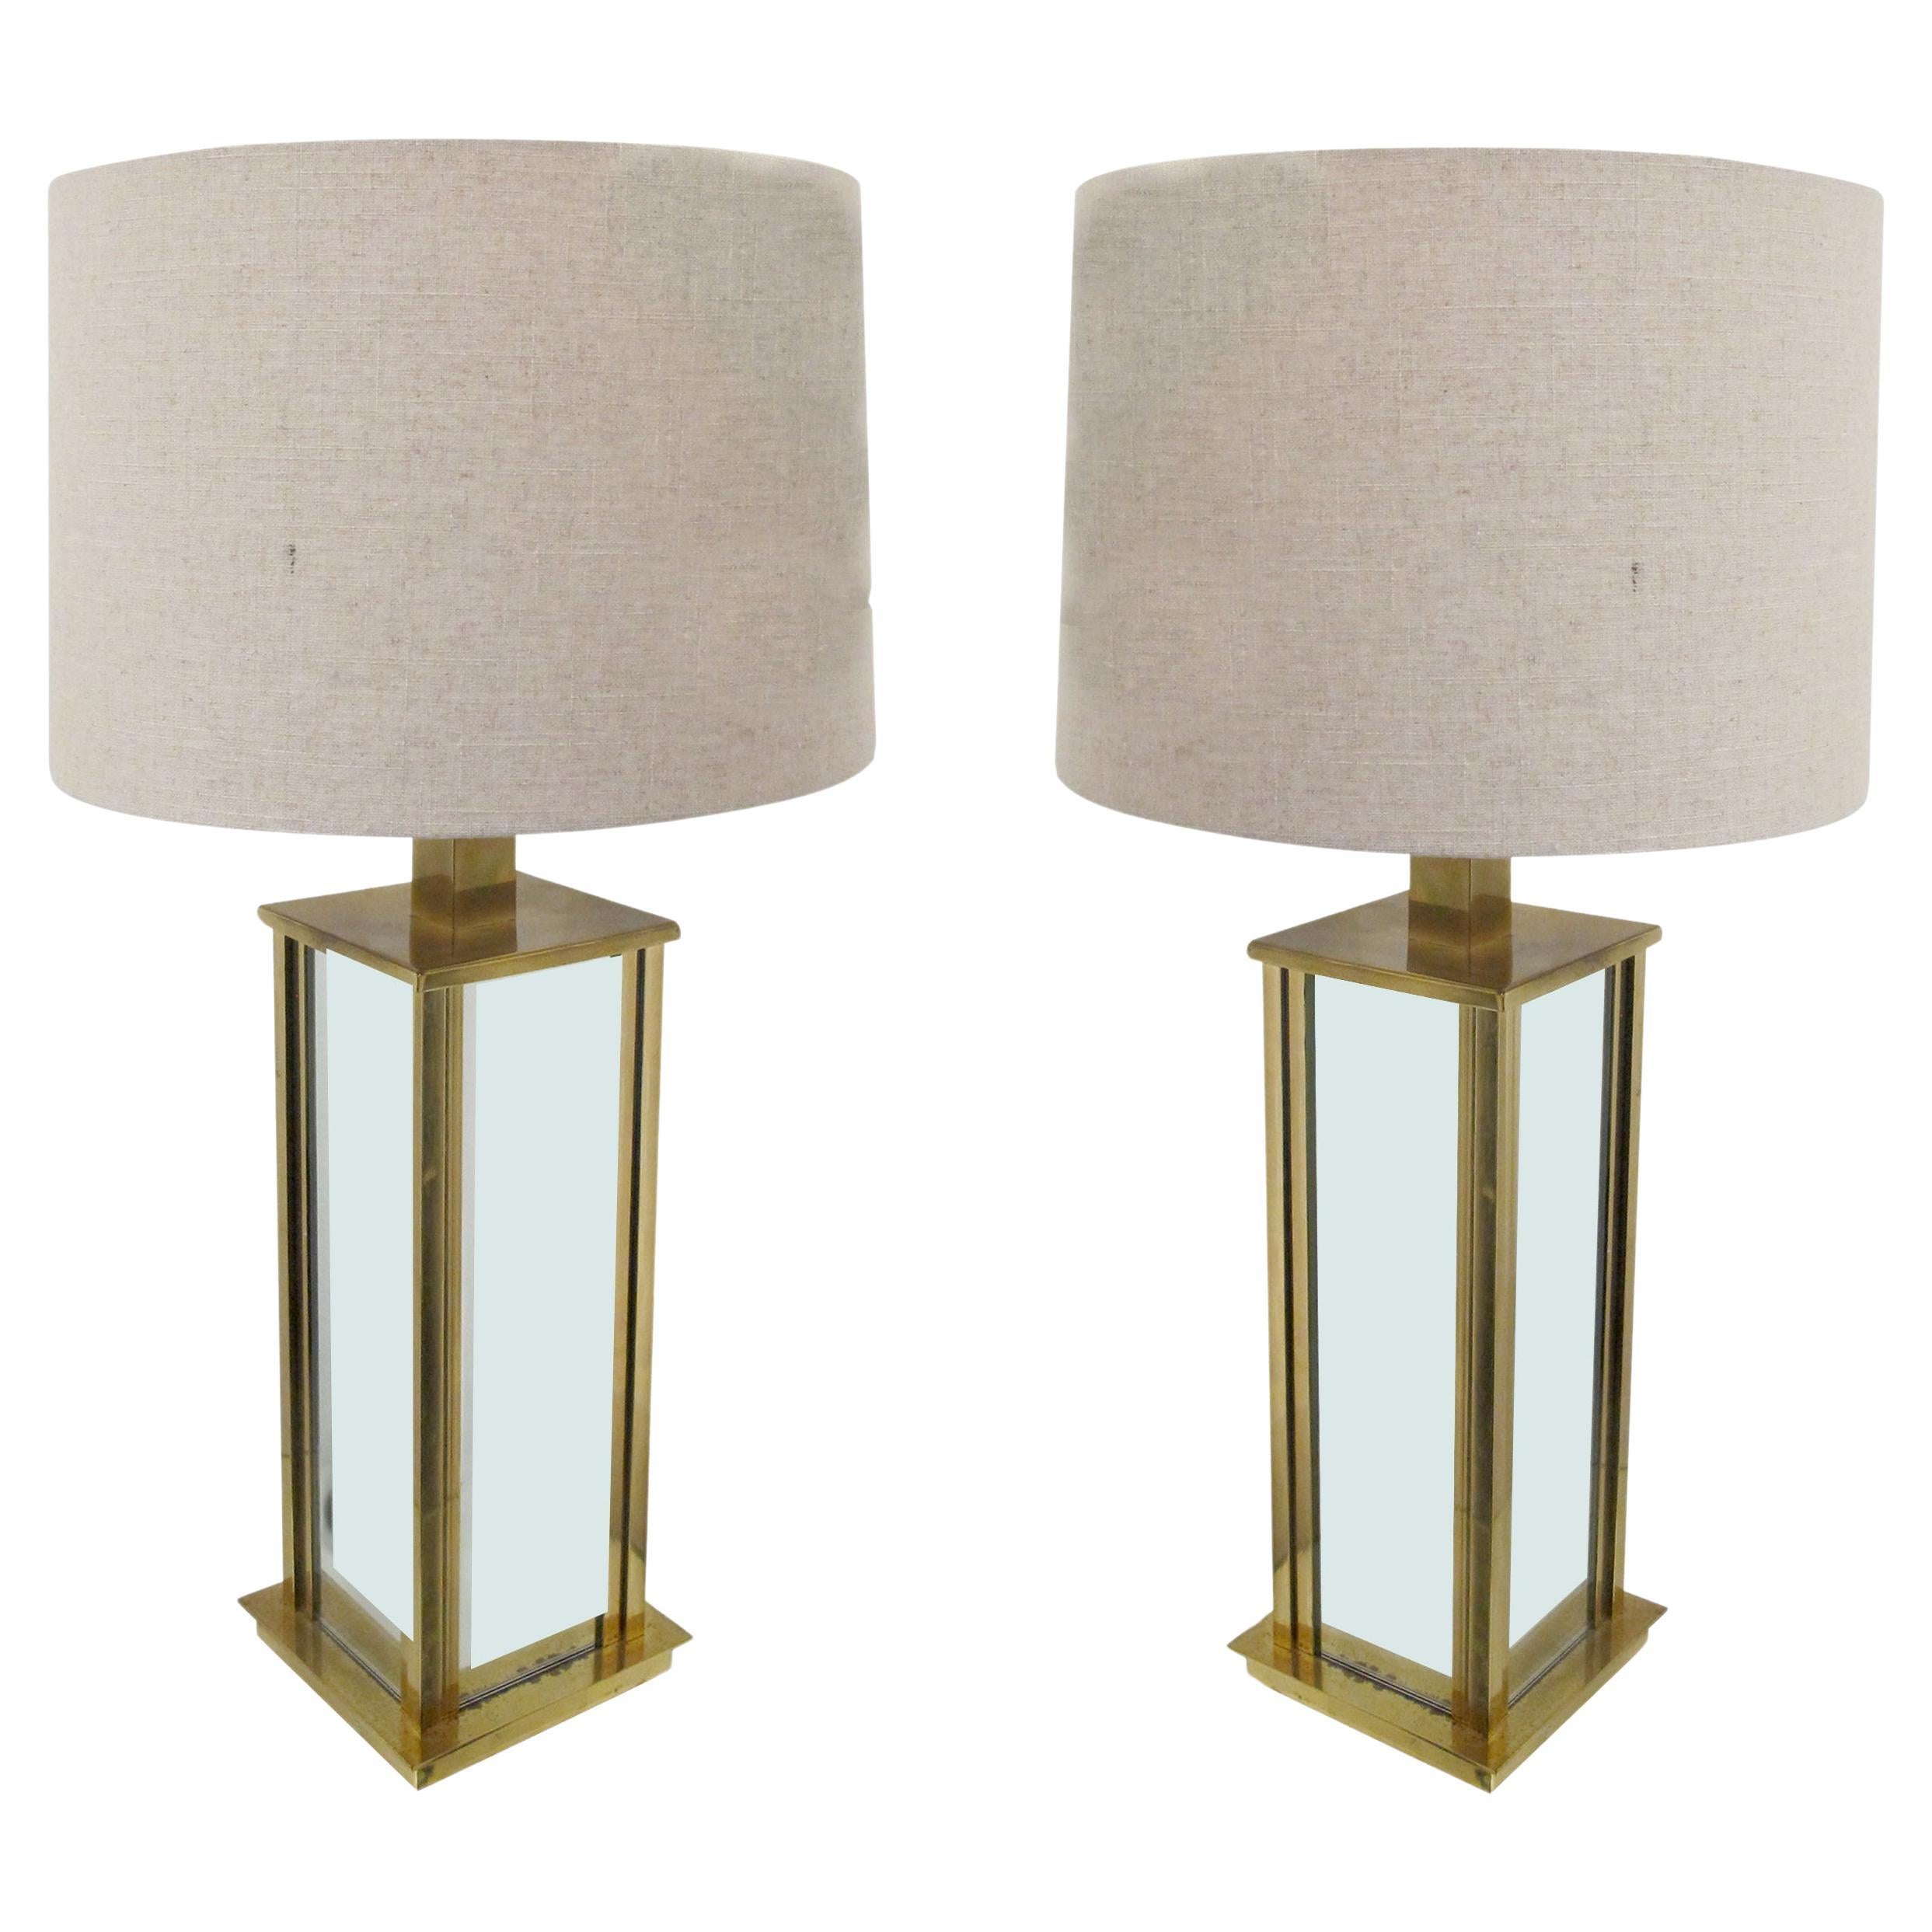 1970s Italian Large Pair of Brass and Mirrored Table Lamps